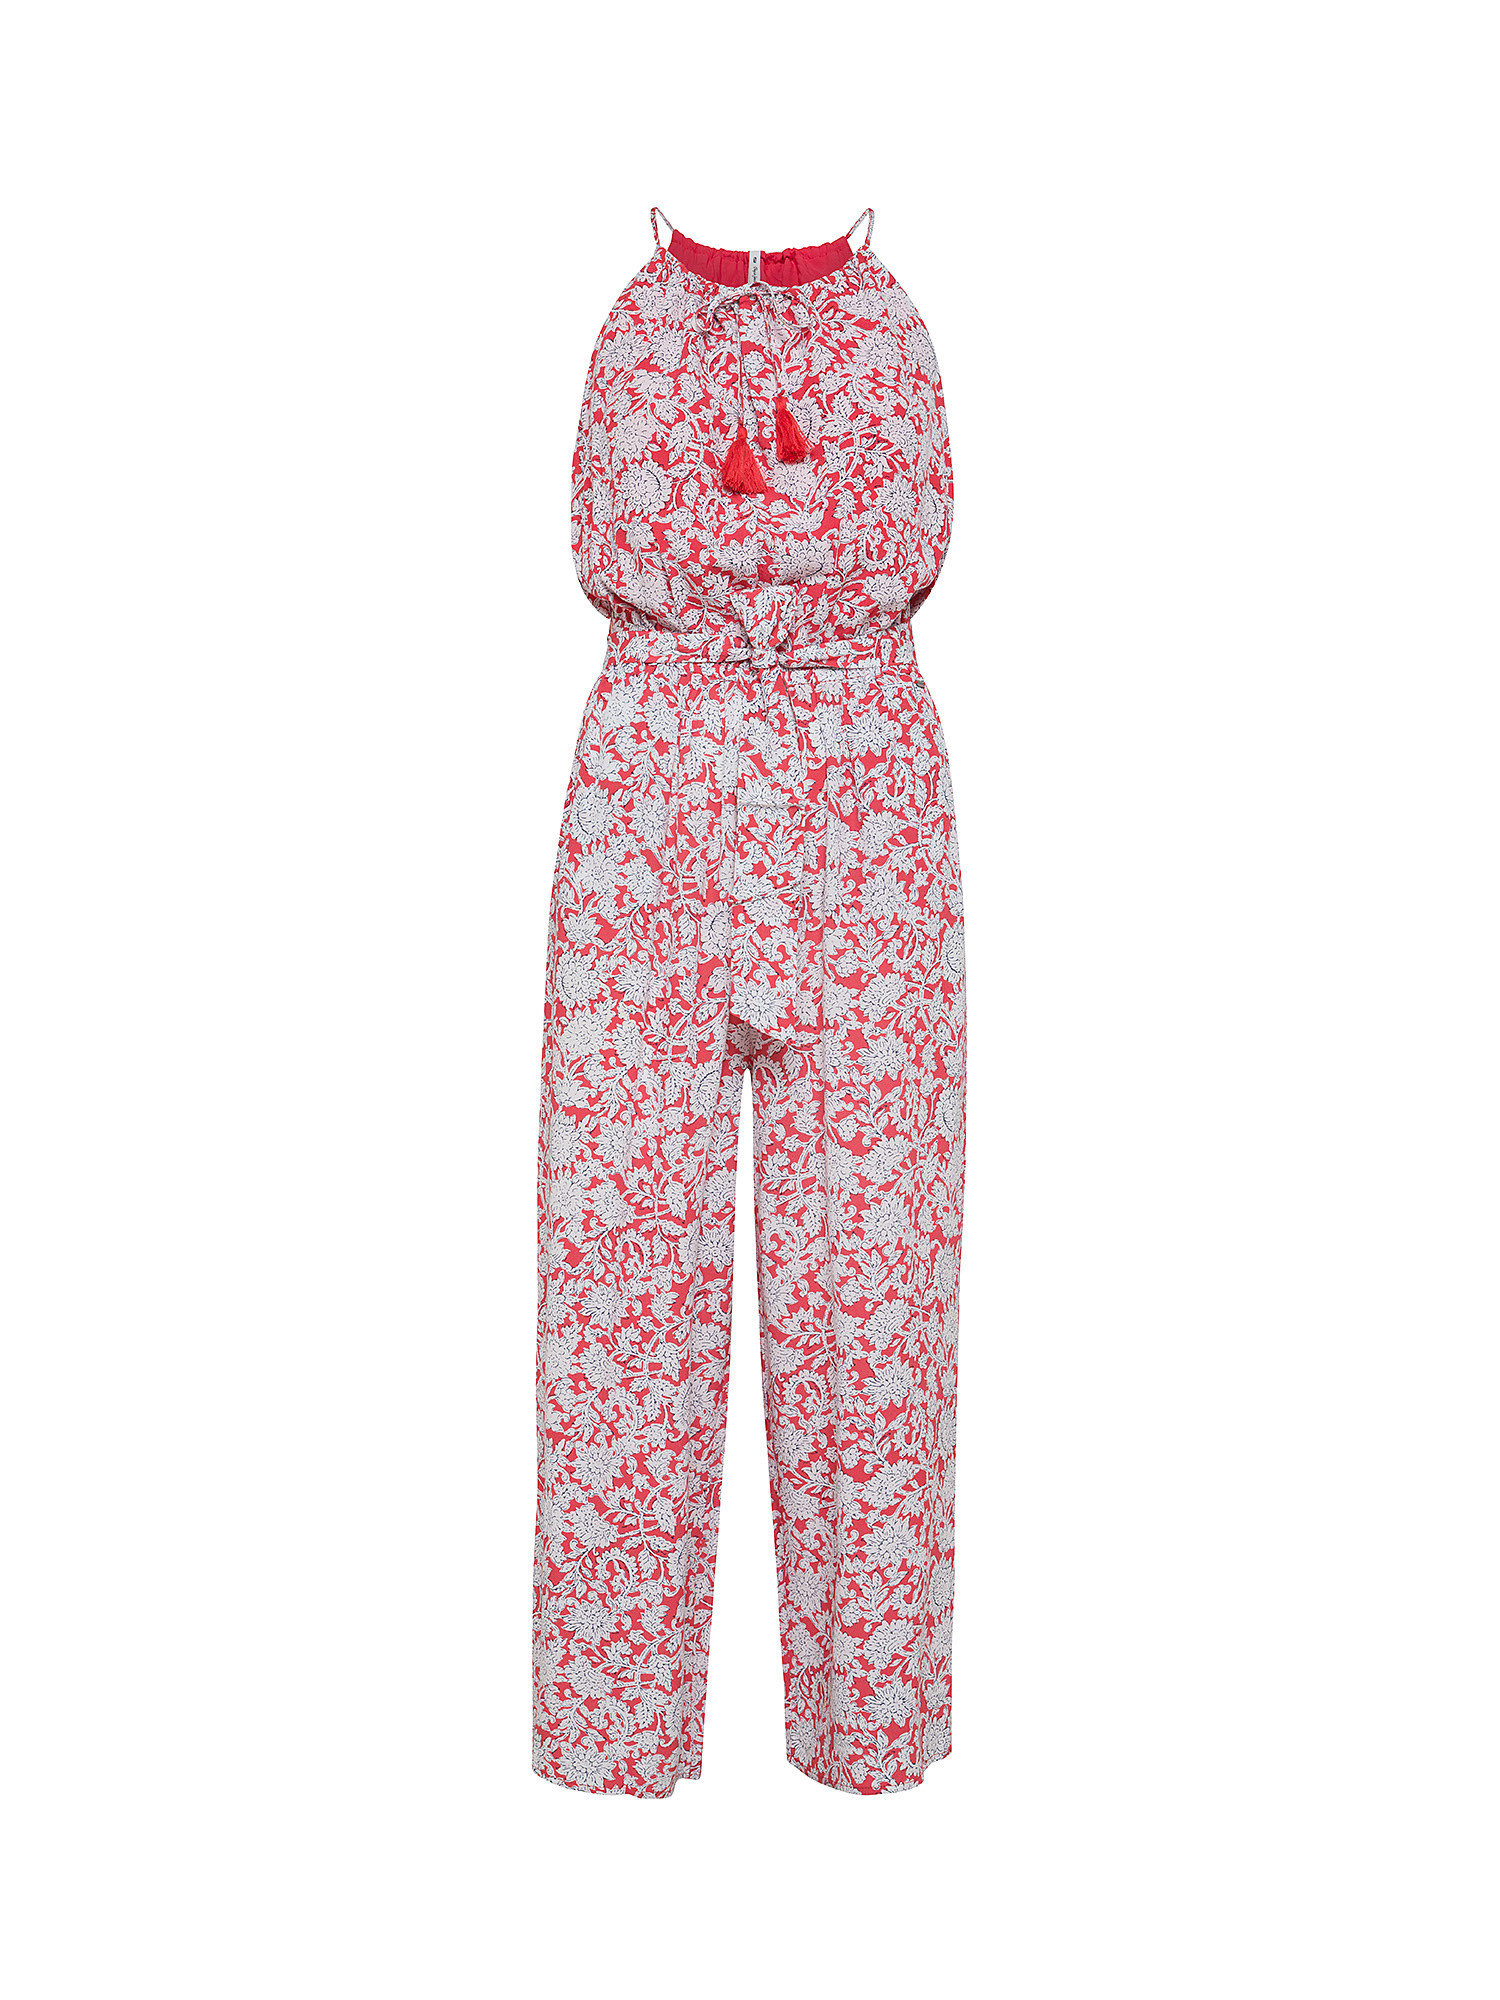 Pepe Jeans - Jumpsuit with floral print, Multicolor, large image number 1